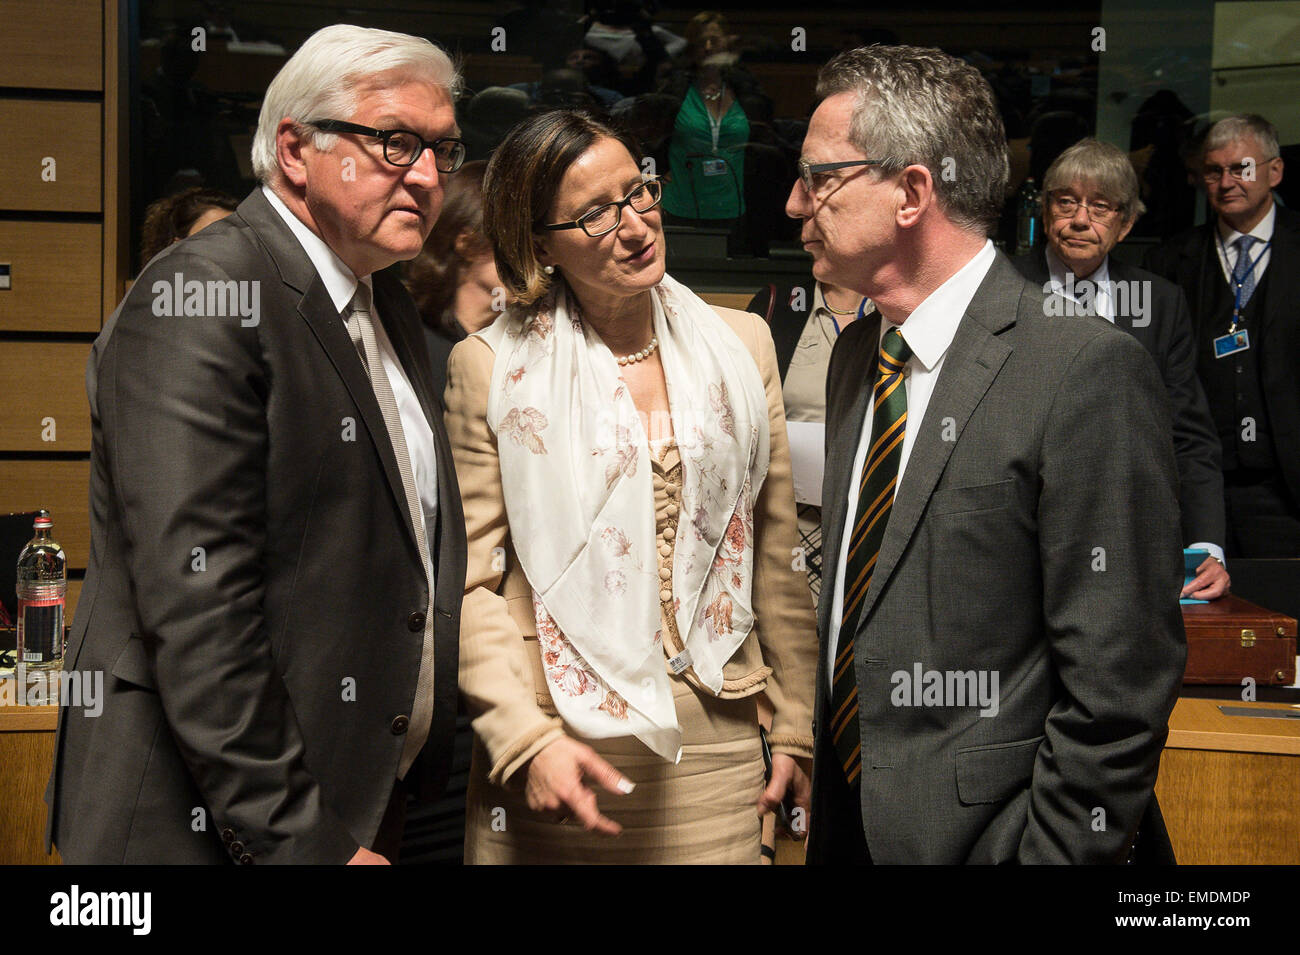 (L-R) German Foreign Minister Frank-Walter Steinmeier, Austrian Interior Minister Johanna Mikl-Leitner and German Interior Minister Thomas de Maiziere prior to the EU Foreign Ministers Council (FAC) at European Council headquarters in Luxembourg on 20.04.2015 . The European Union ministers of Foreign Affairs hold urgent talks in a bid to halt the rising death toll of refugees in the Mediterranean Sea./picture alliance Stock Photo